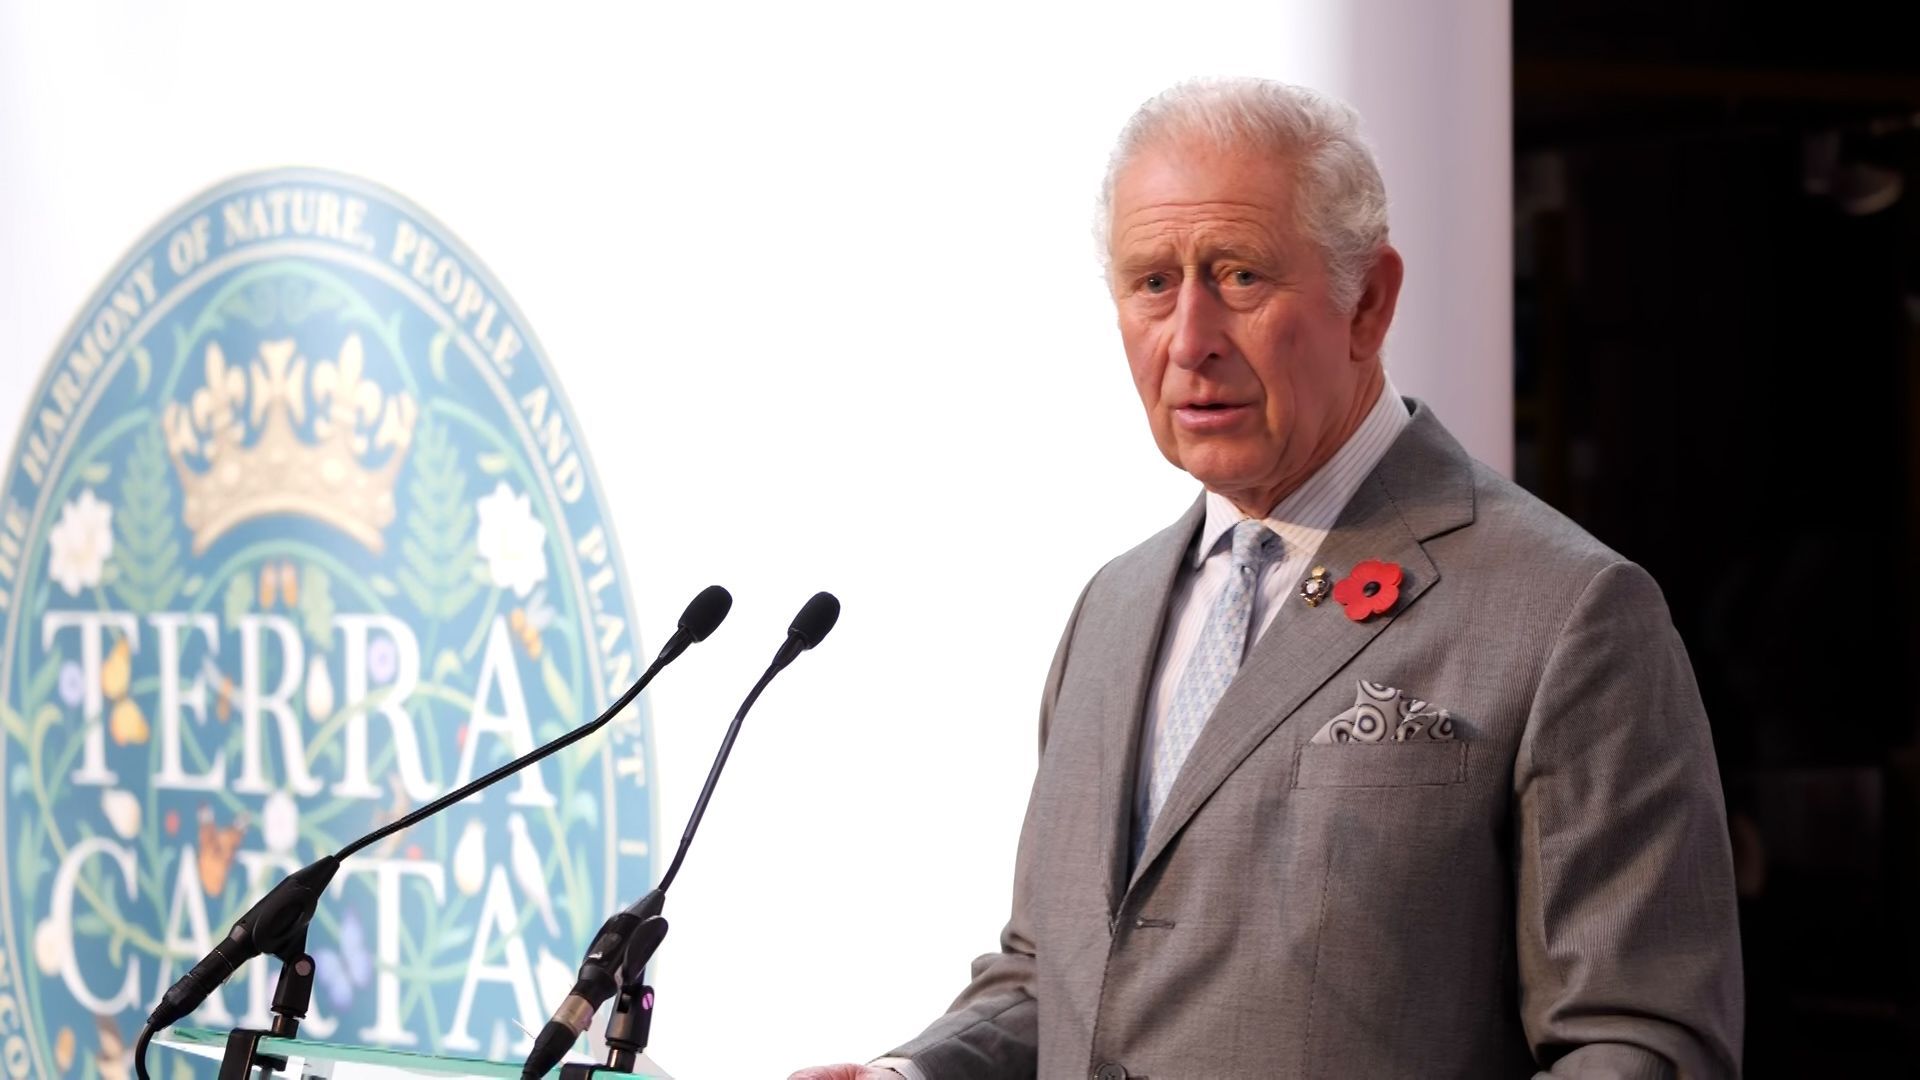 Criticizing Charles: There are 160 laws the king doesn't have to abide by